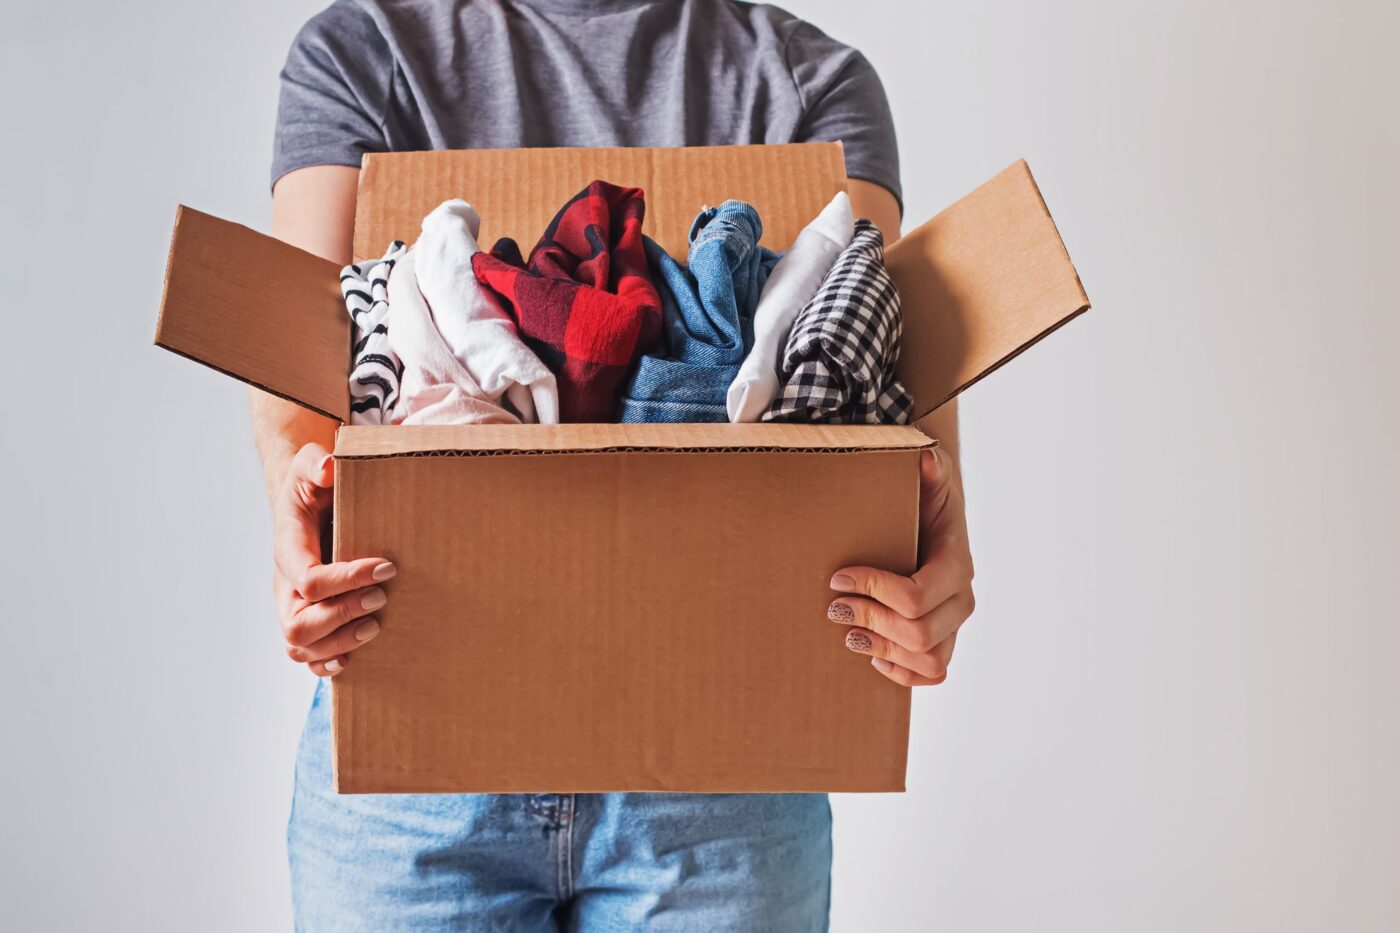 Person holding a box packed with clothing